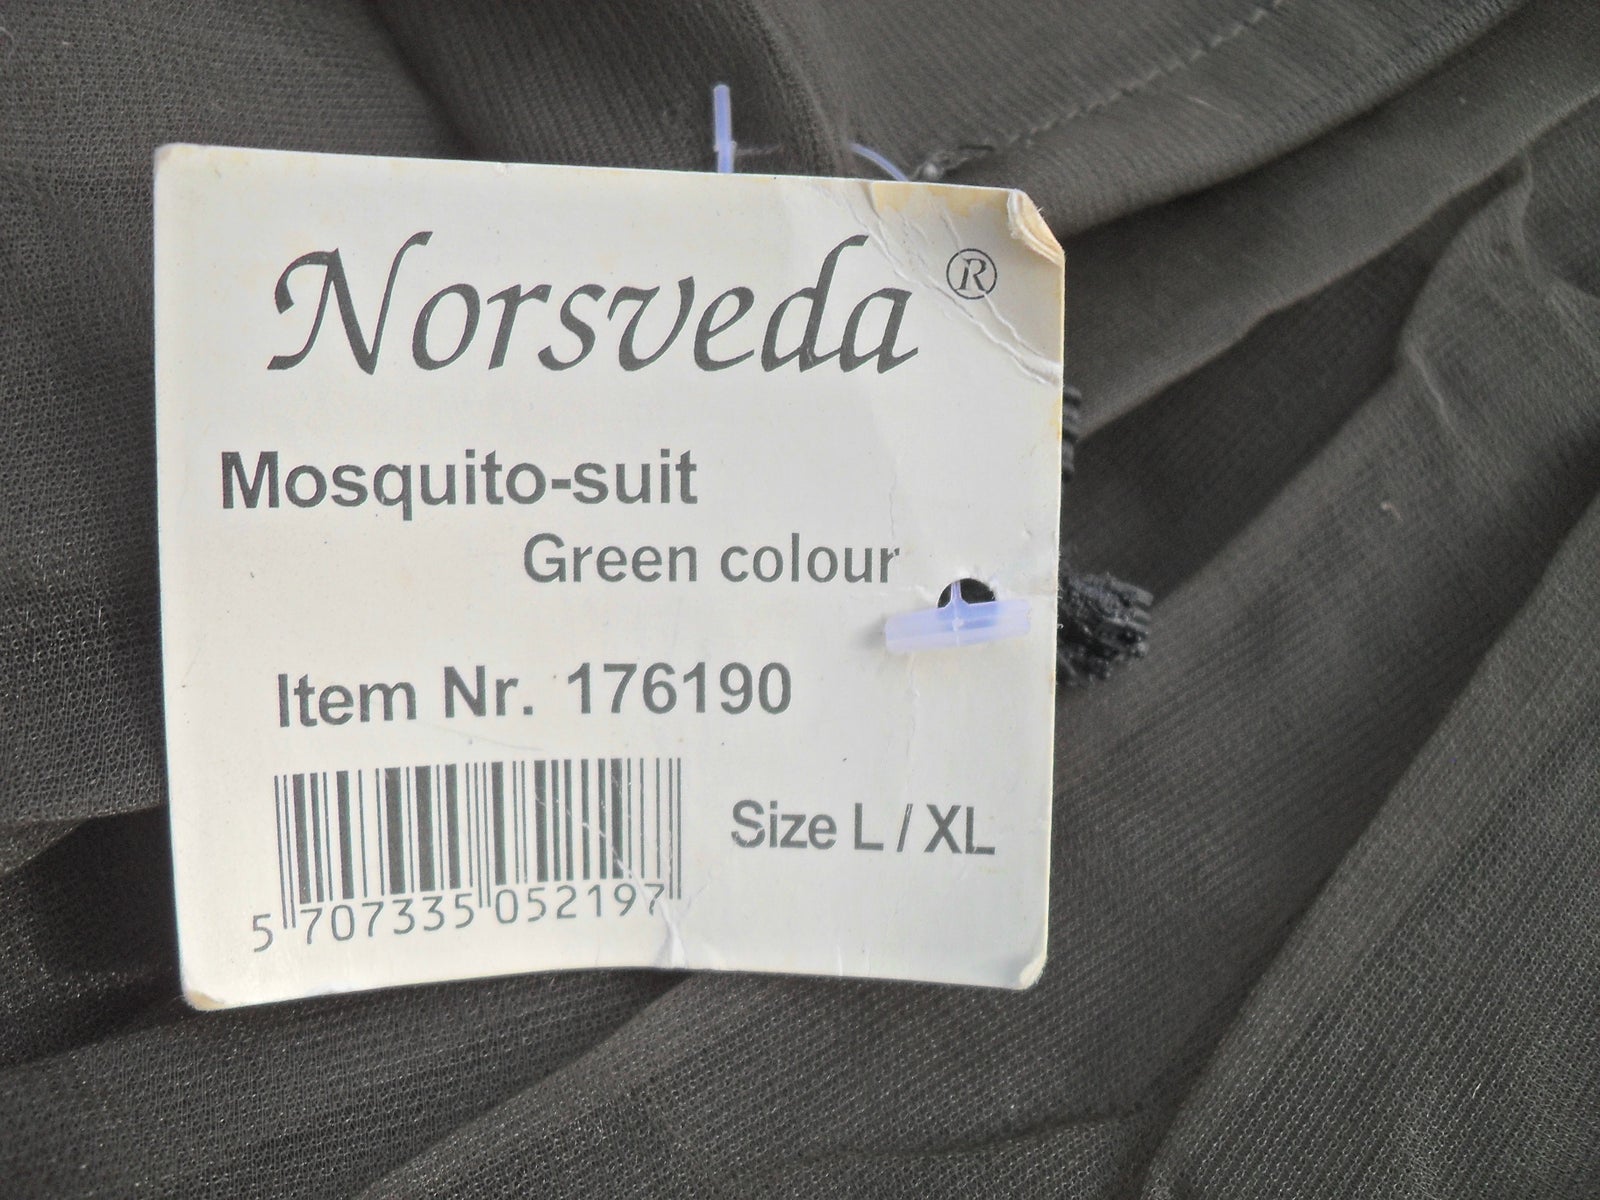 Andet, NORSVEDA MOSQUITO-SUIT